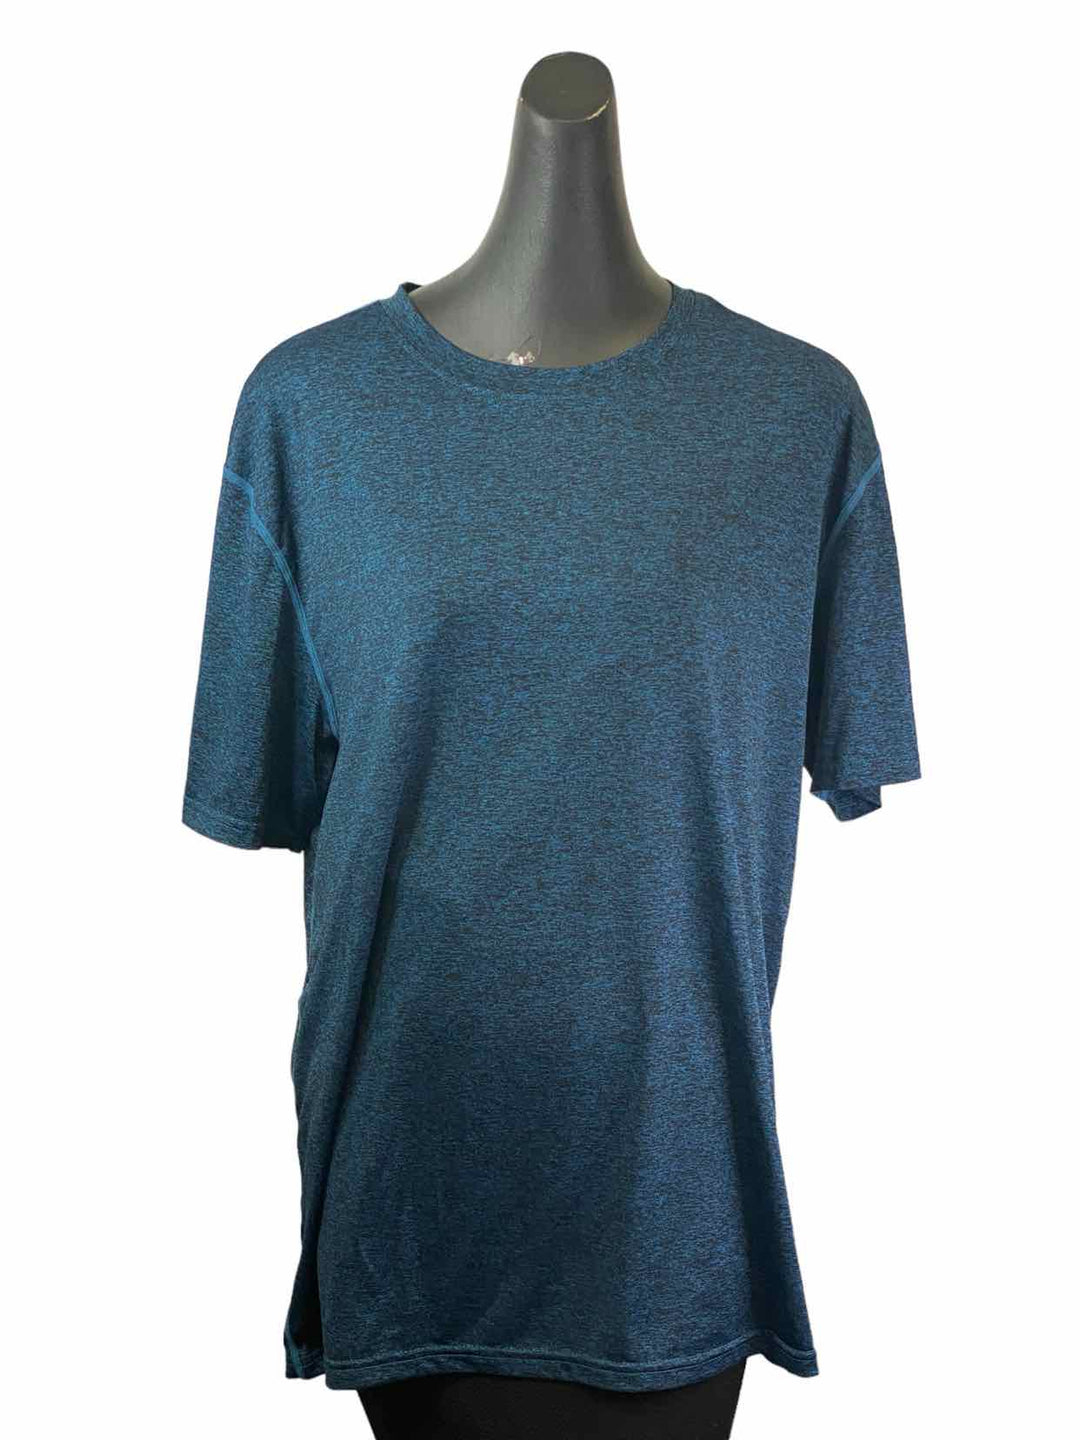 Unknown Brand Size XL Blue Black Athletic Short Sleeve